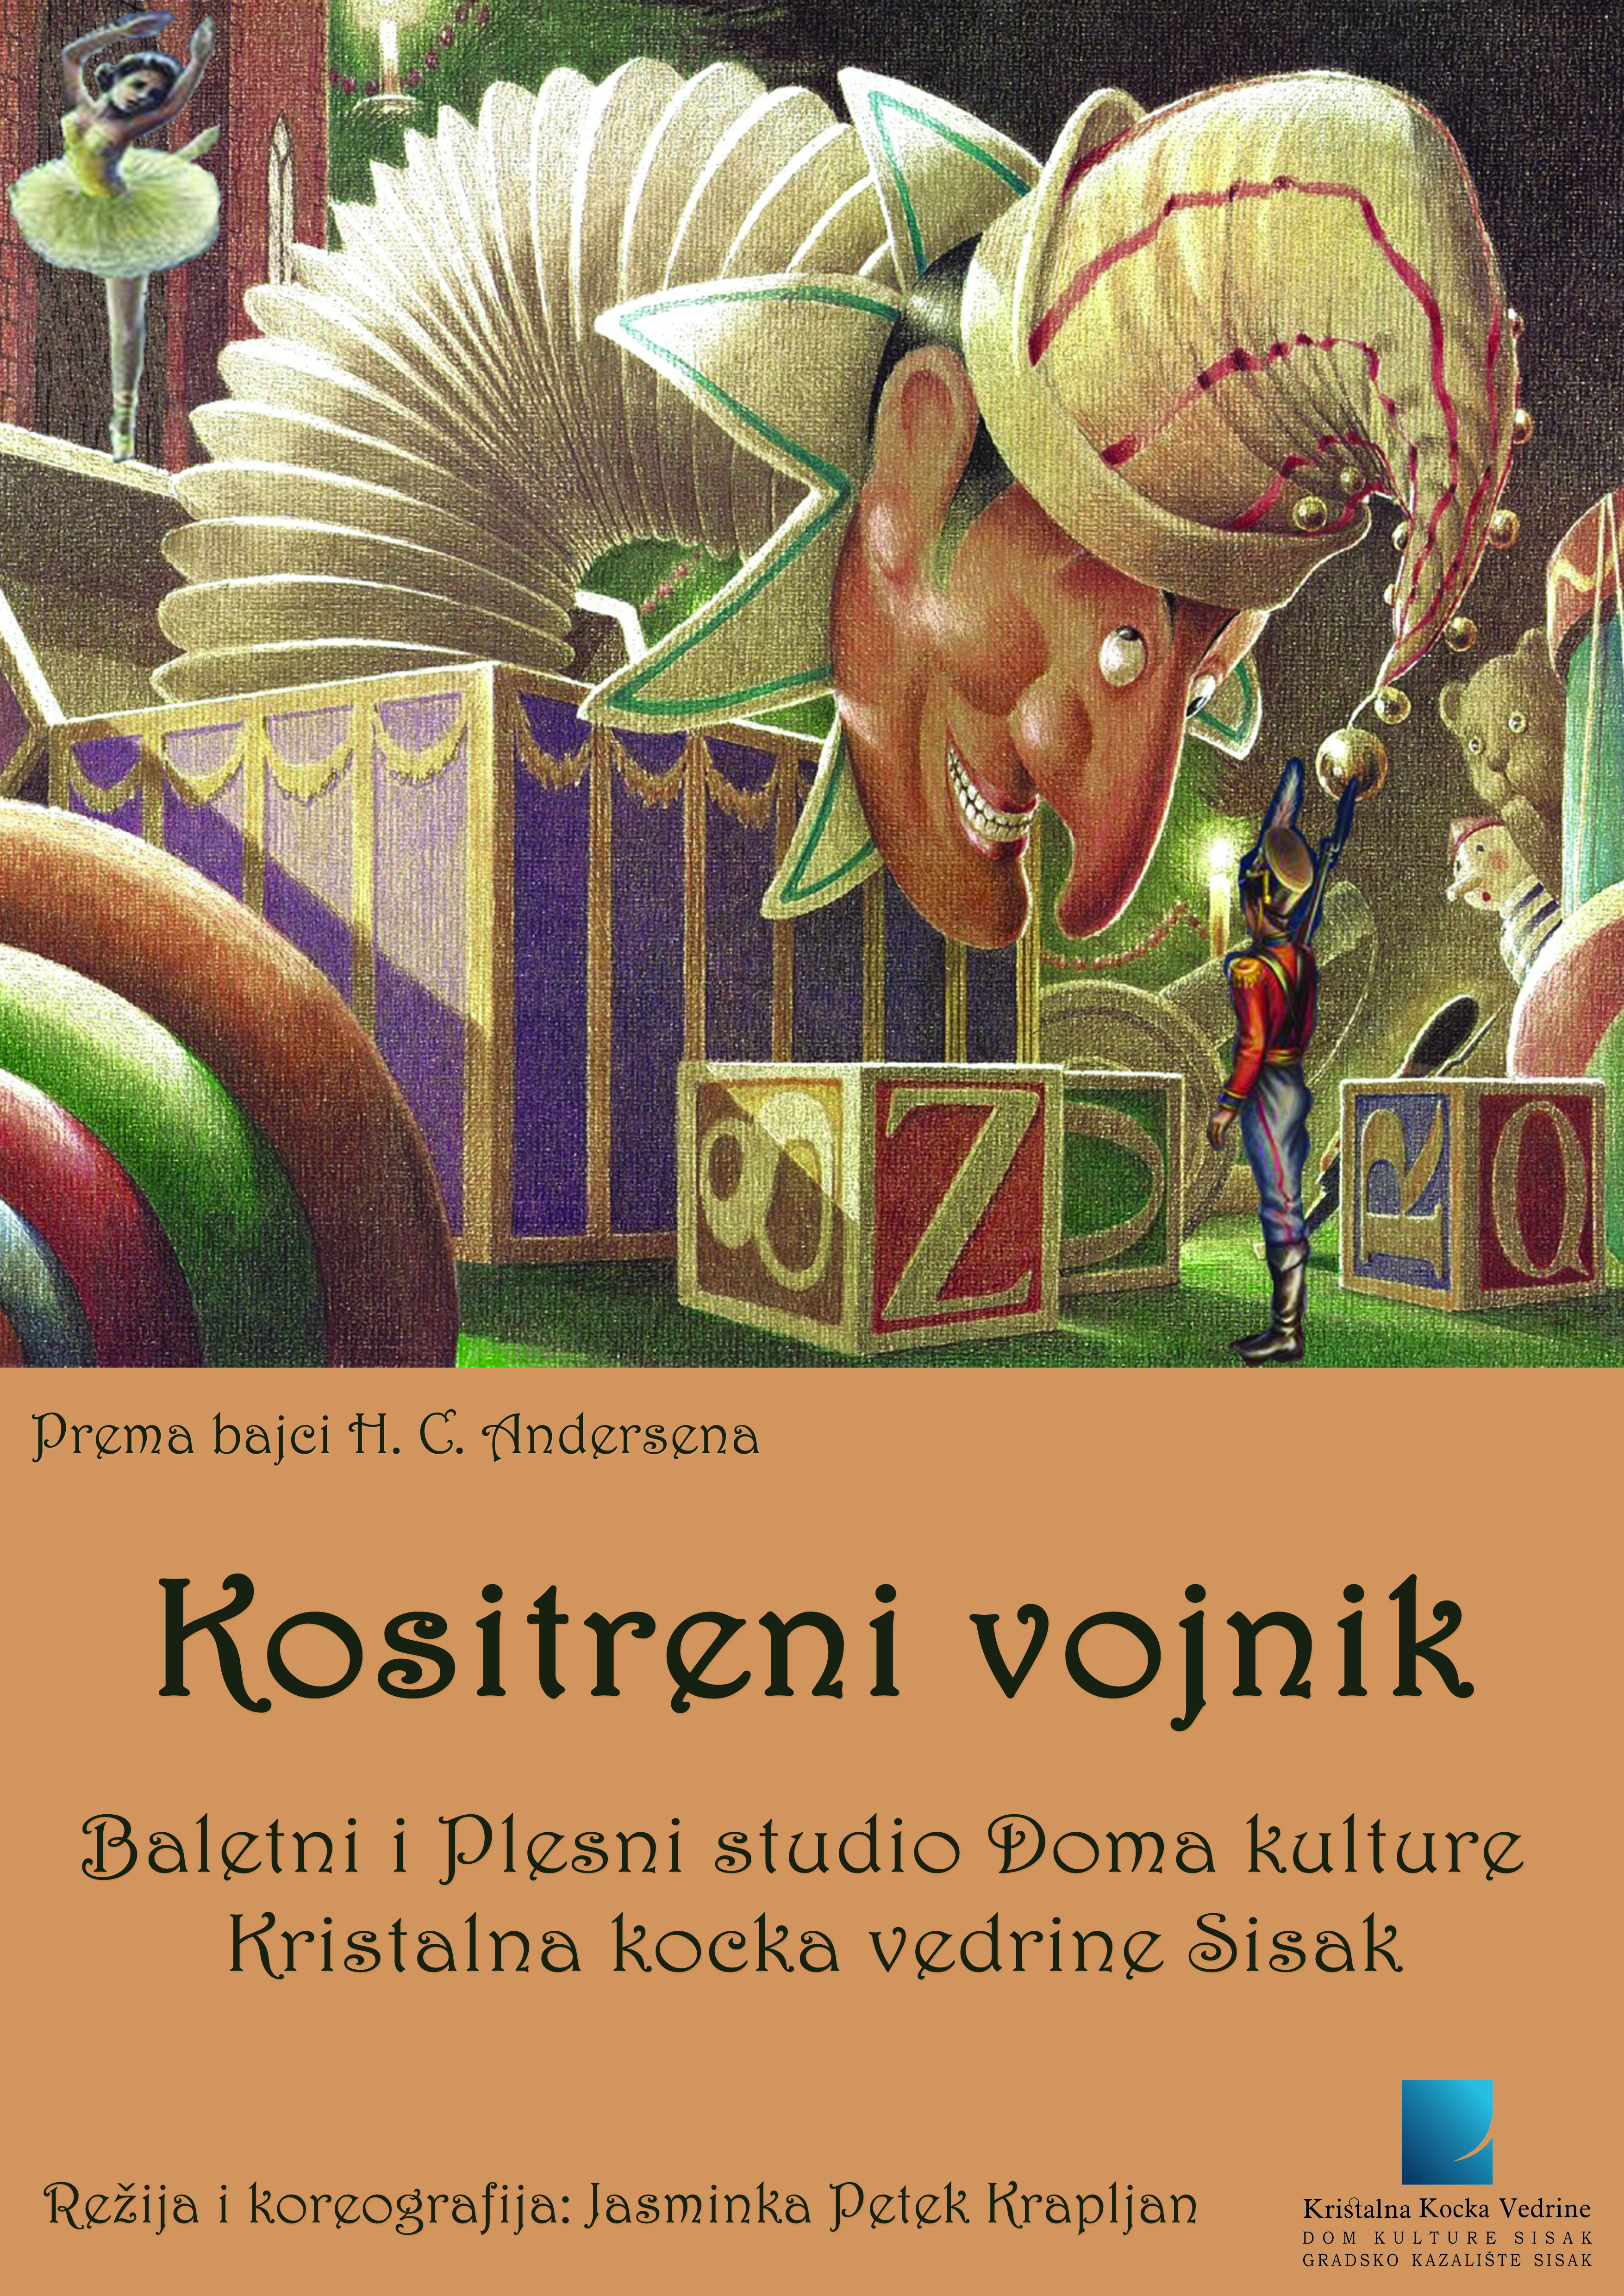 You are currently viewing Kositreni vojnik